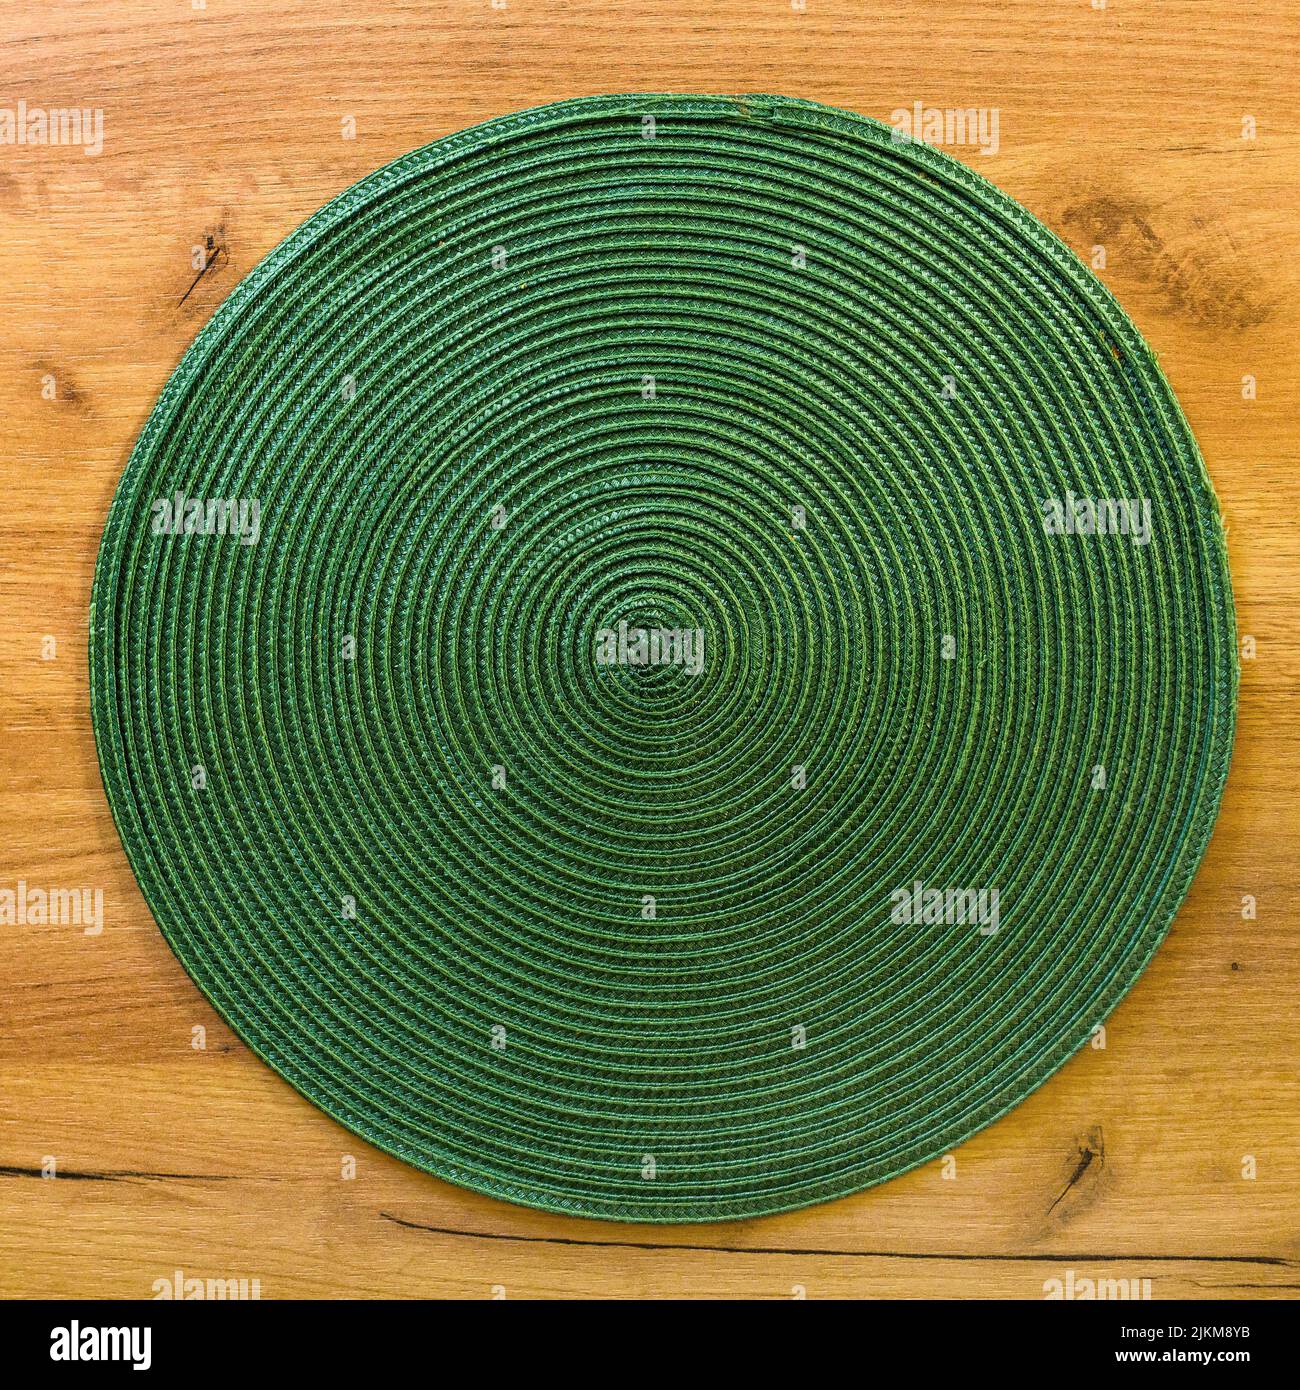 Texture of green plastic woven placemat on dining table, top view Stock Photo